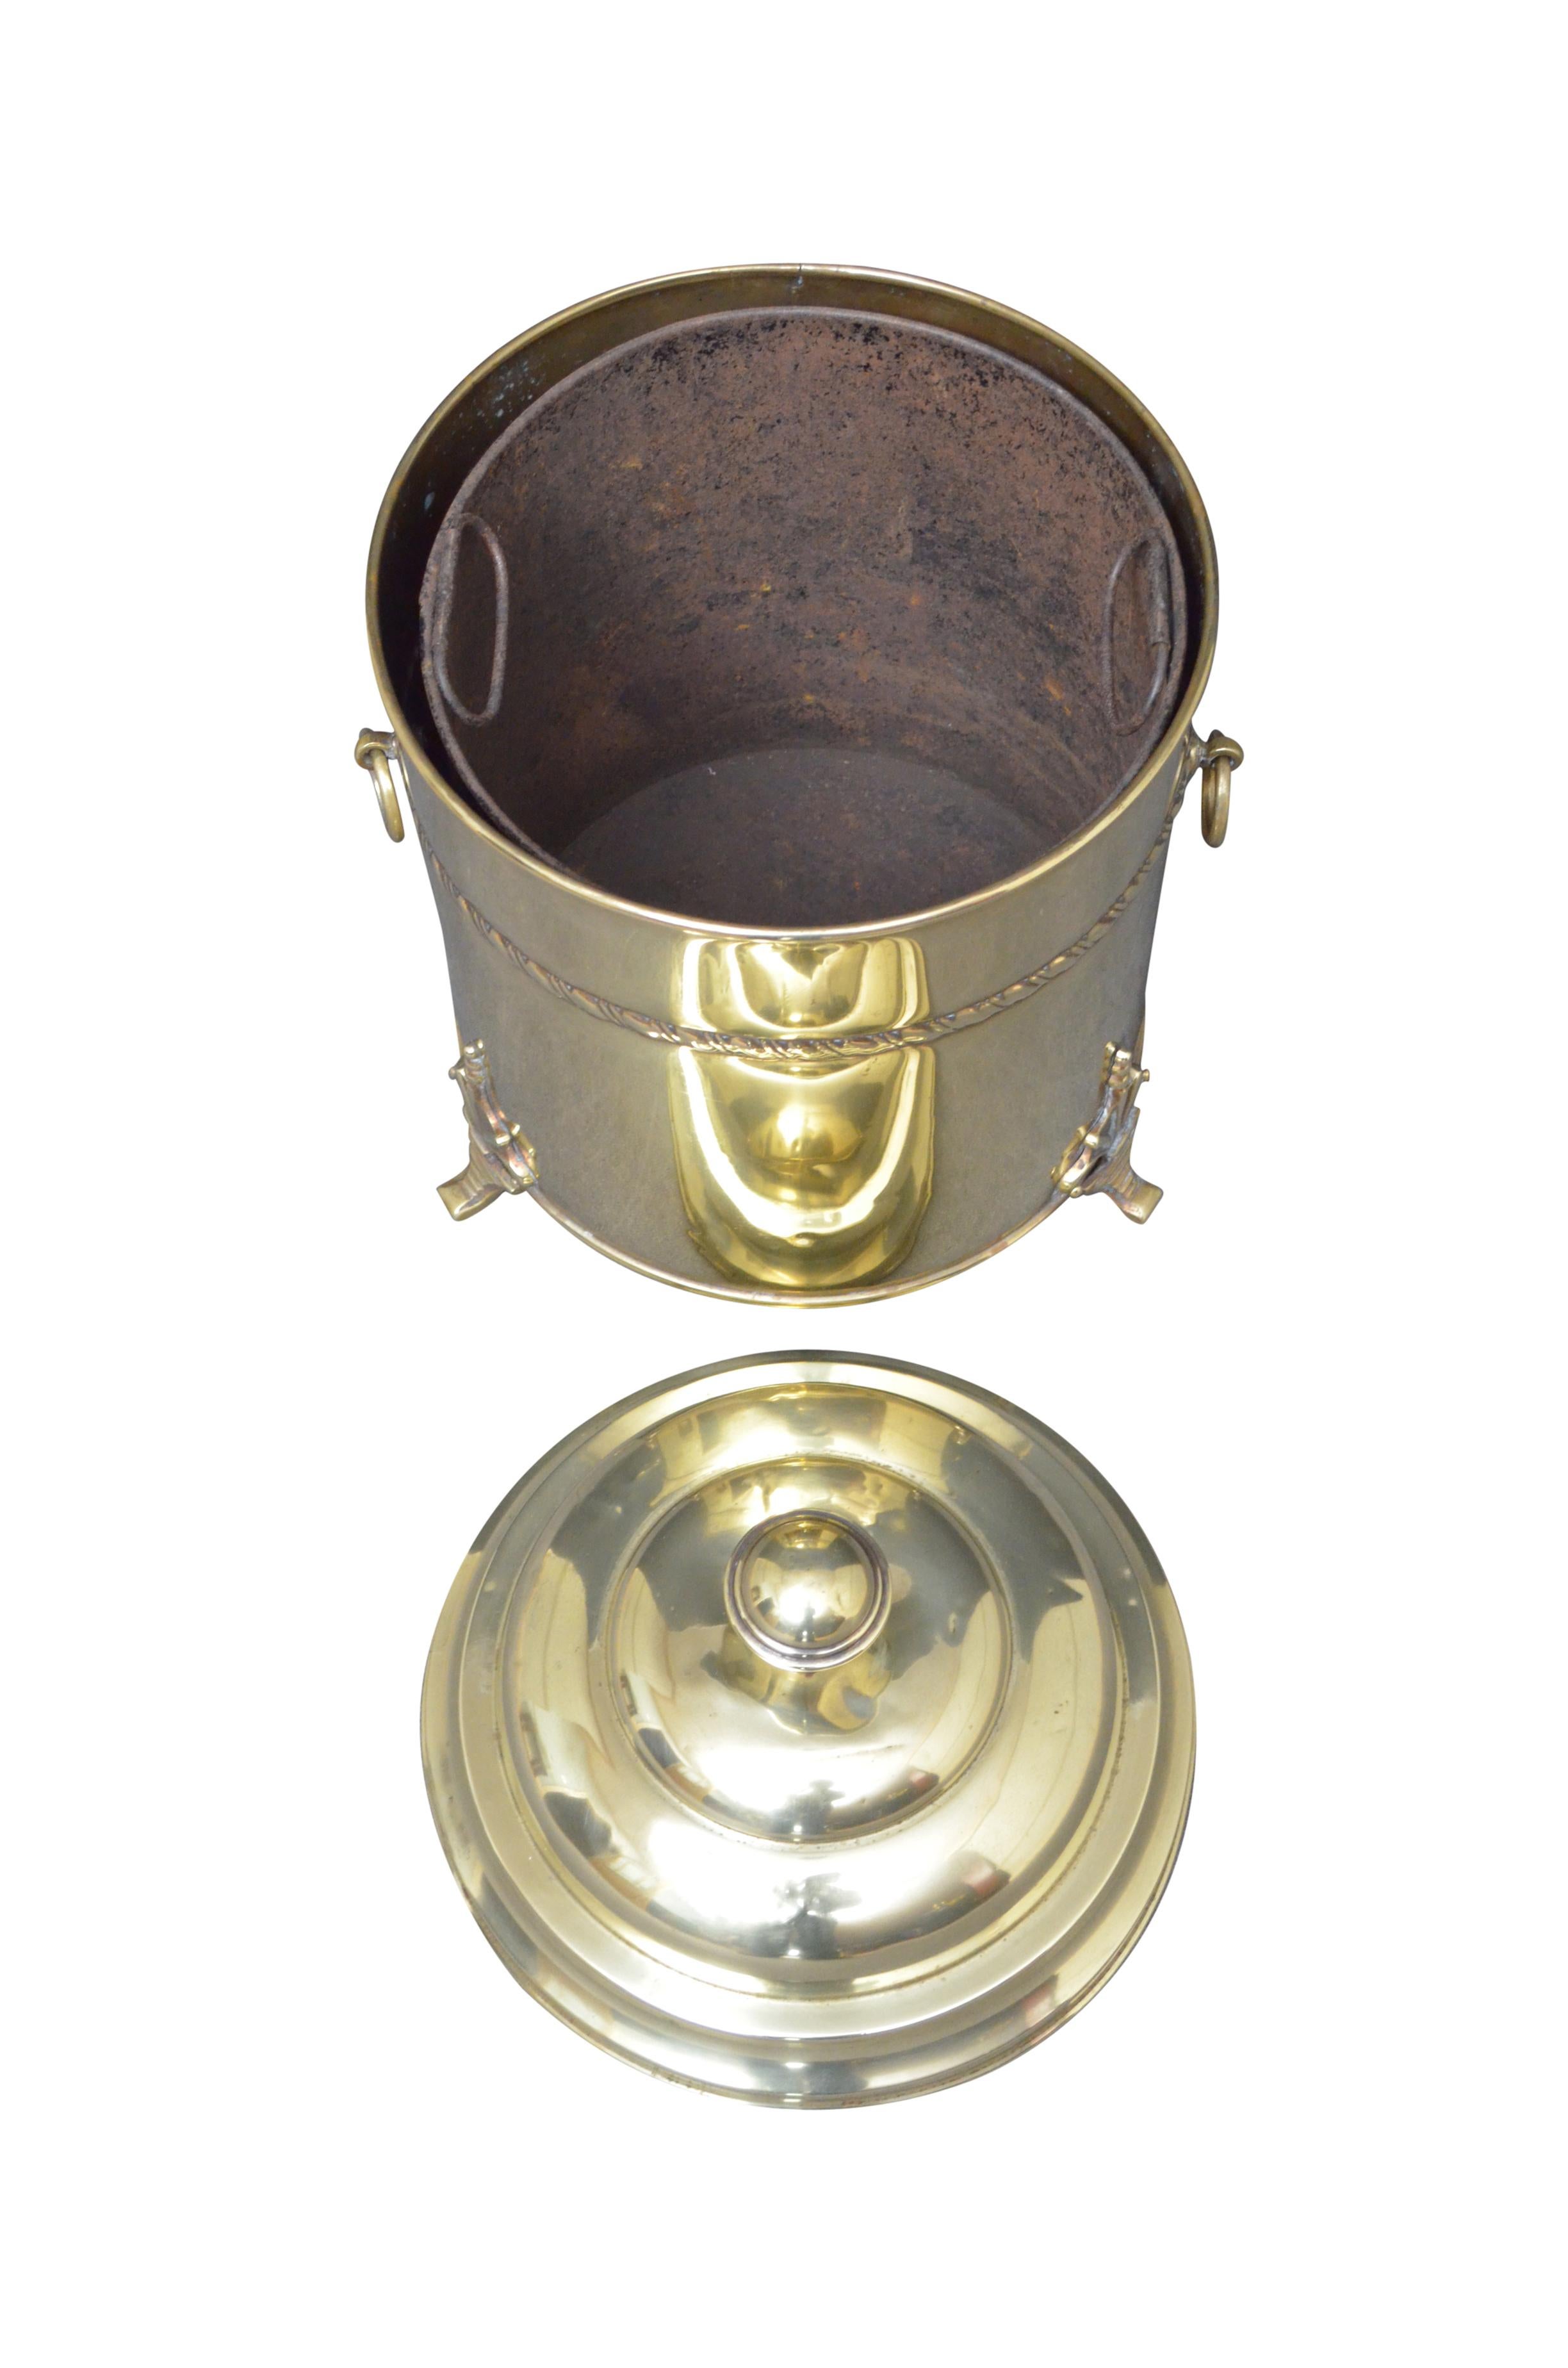 k0026 Edwardian brass coal bin with lift up lid , original liner, decorative band, carrying handles and decorative feet. This coal bucket would make a perfect planter / jardinier, it has been cleaned and polished and it is ready to use at home.